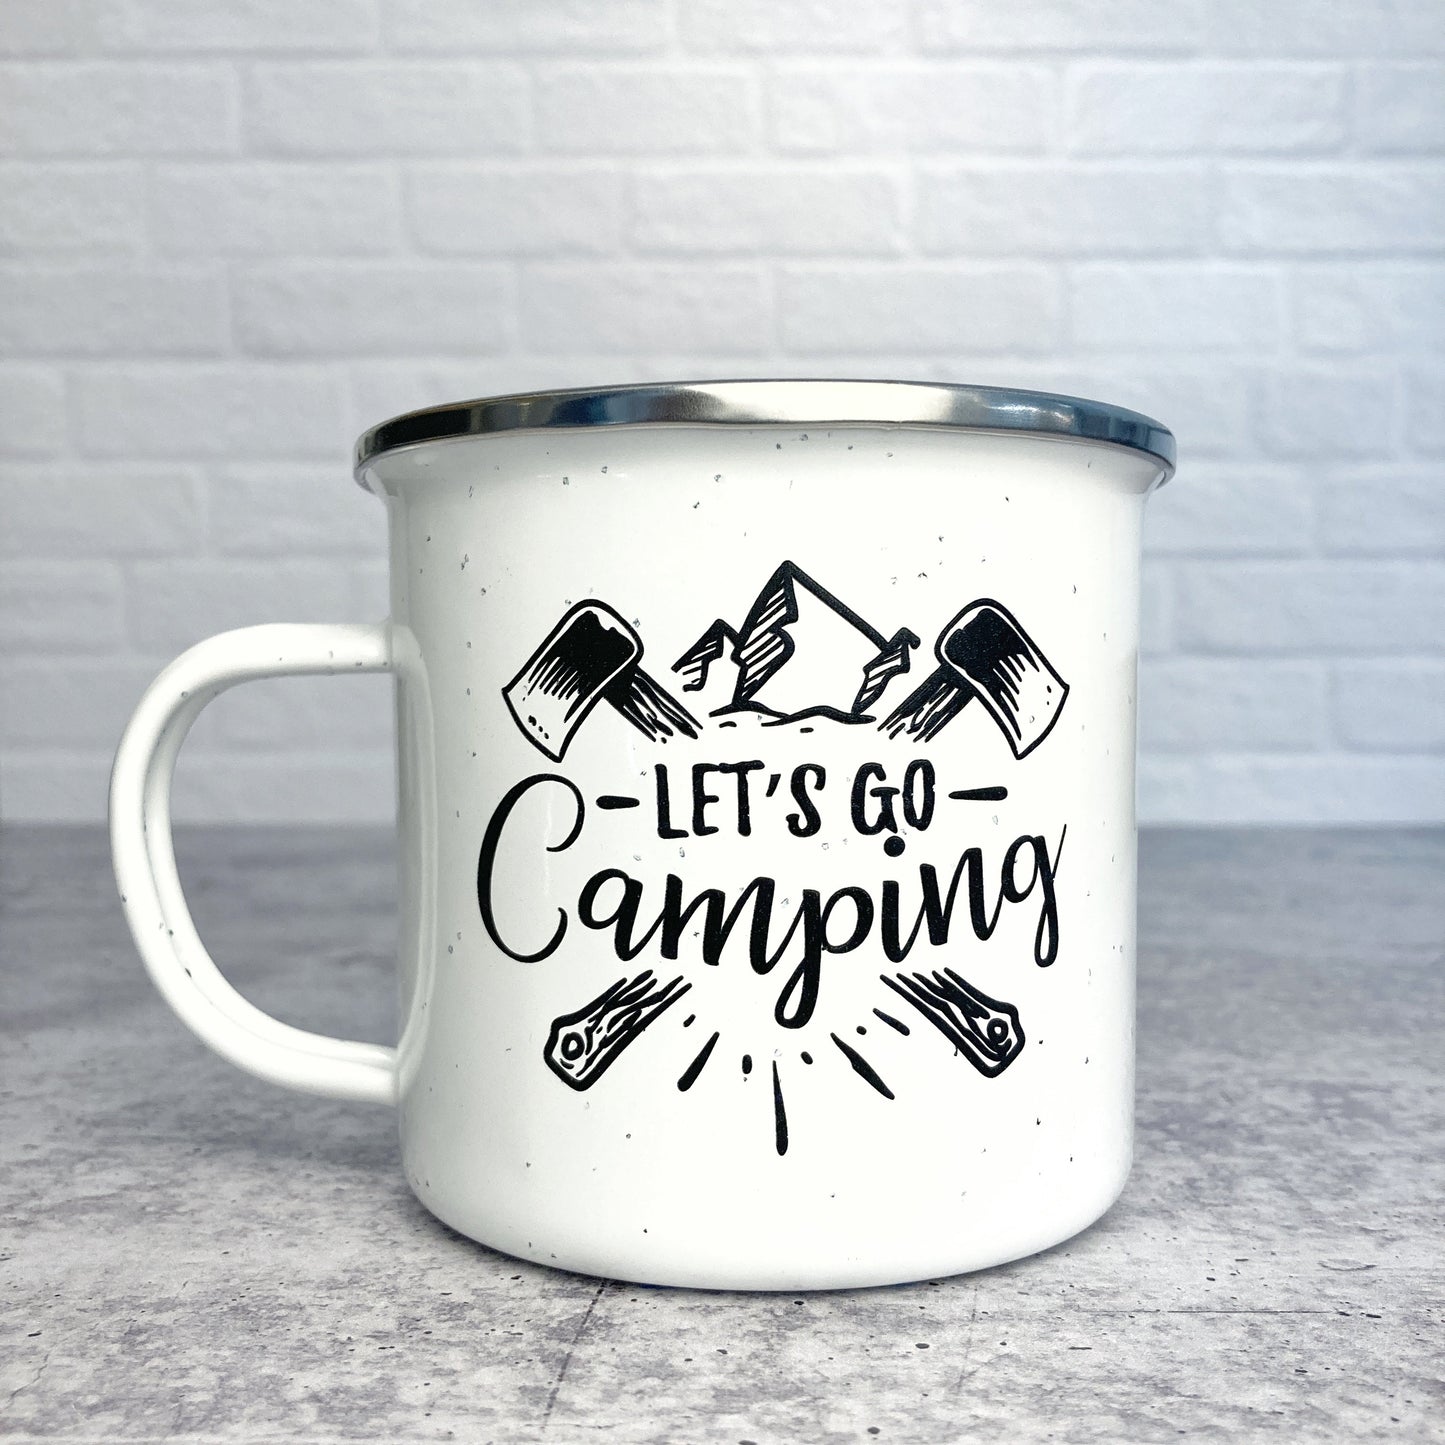 Let's Go Camping with Axe design on Enamel Mug